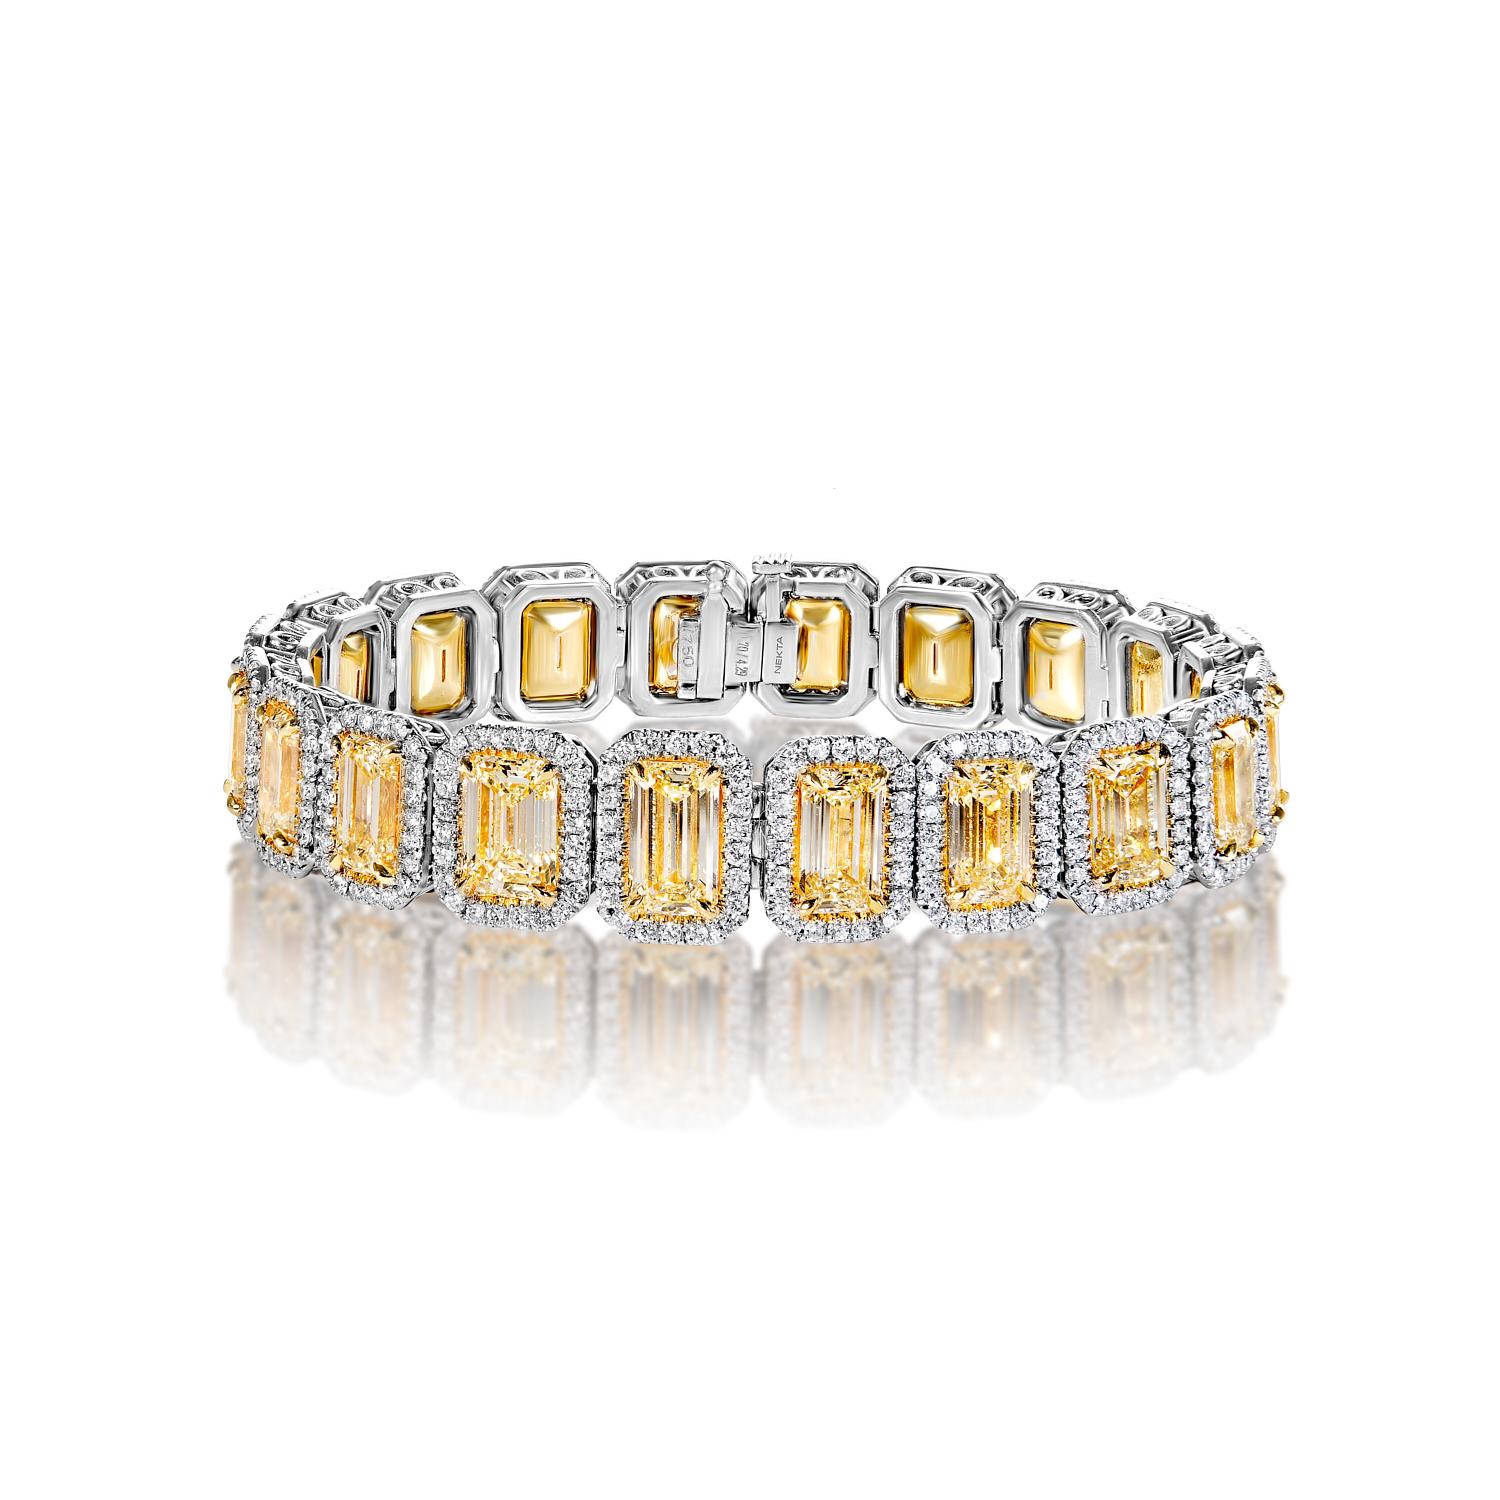 The PRISCILLA 35.99 Carat Single Row Diamond Tennis Bracelet features EMERALD CUT DIAMONDS brilliants weighing a total of approximately 35.99 carats, set in 18K White Gold.

Style:
Diamonds
Diamond Size: 31.70 Carats
Color: Yellow
Diamond Shape: